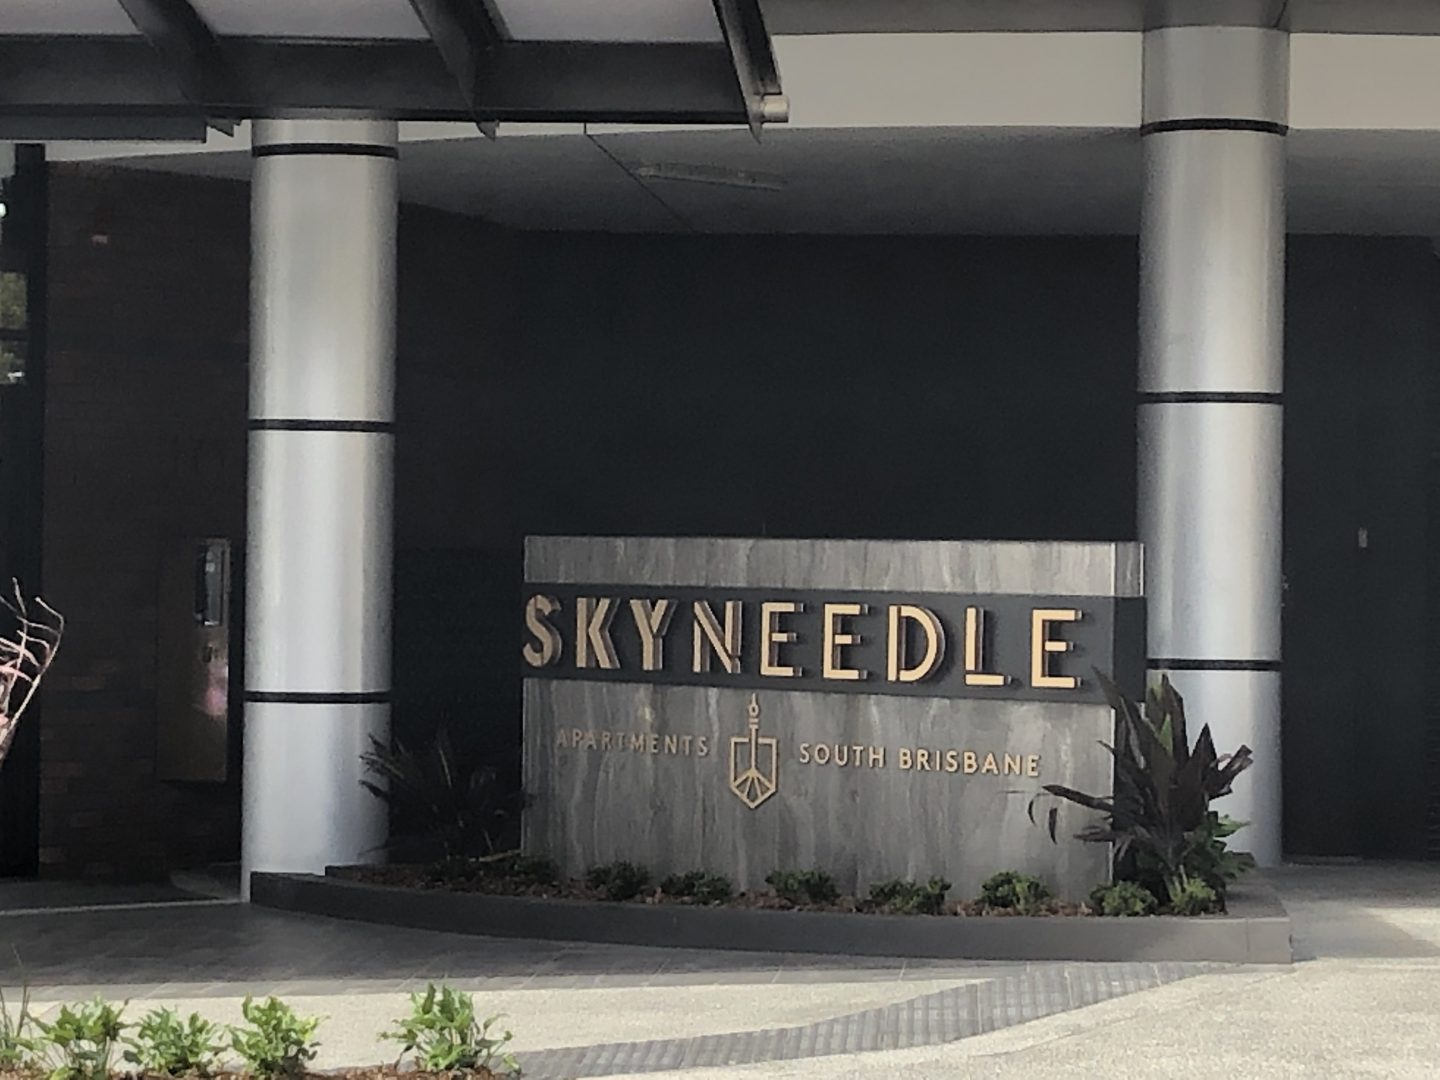 Skyneedle Apartments Entry construction update 21/02/2019